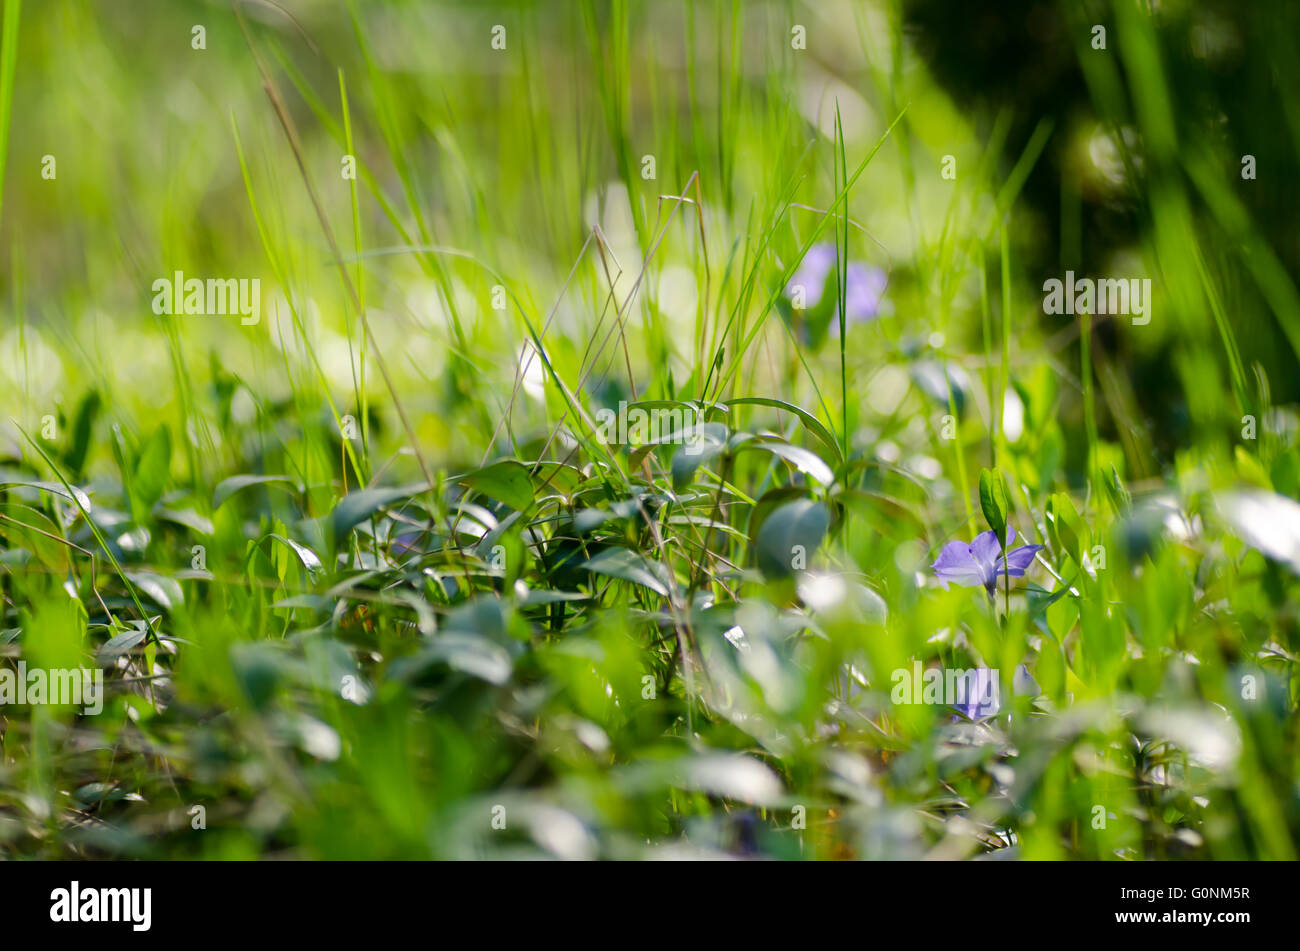 fresh grass in spring forest groundcover Stock Photo